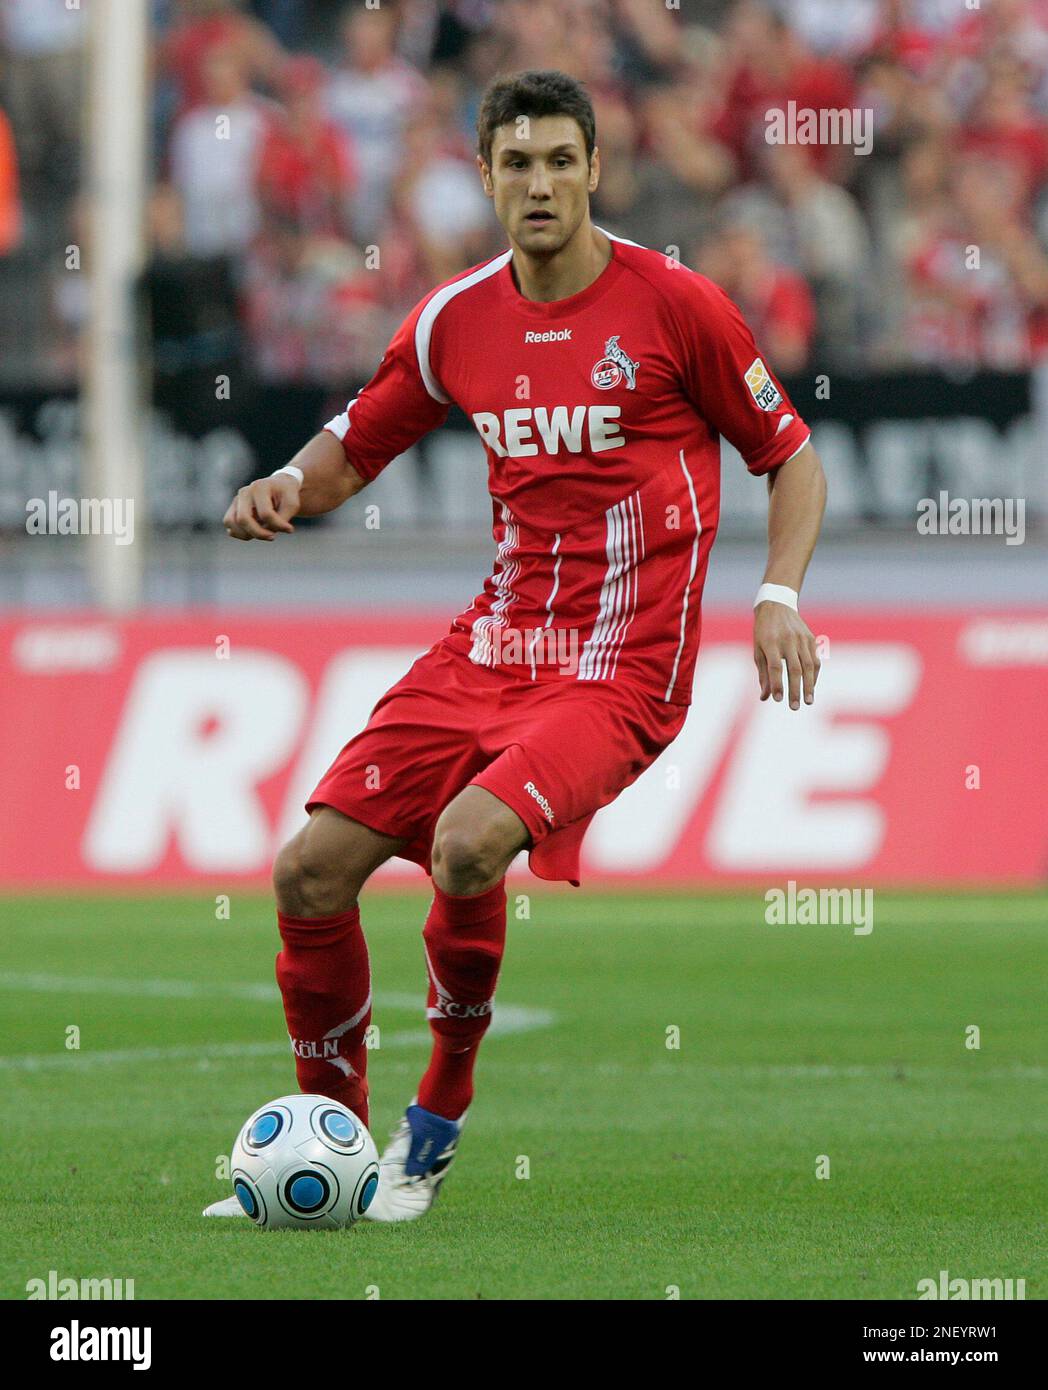 Cologne's Kevin Pezzoni goes with the ball during the German first division Bundesliga soccer match between FC Cologne and VfL Wolfsburg in Cologne, Germany, Saturday, Aug. 15, 2009. (AP Photo/Hermann J. Knippertz) **Eds Note: German spelling of Cologne is Koeln** Stock Photo